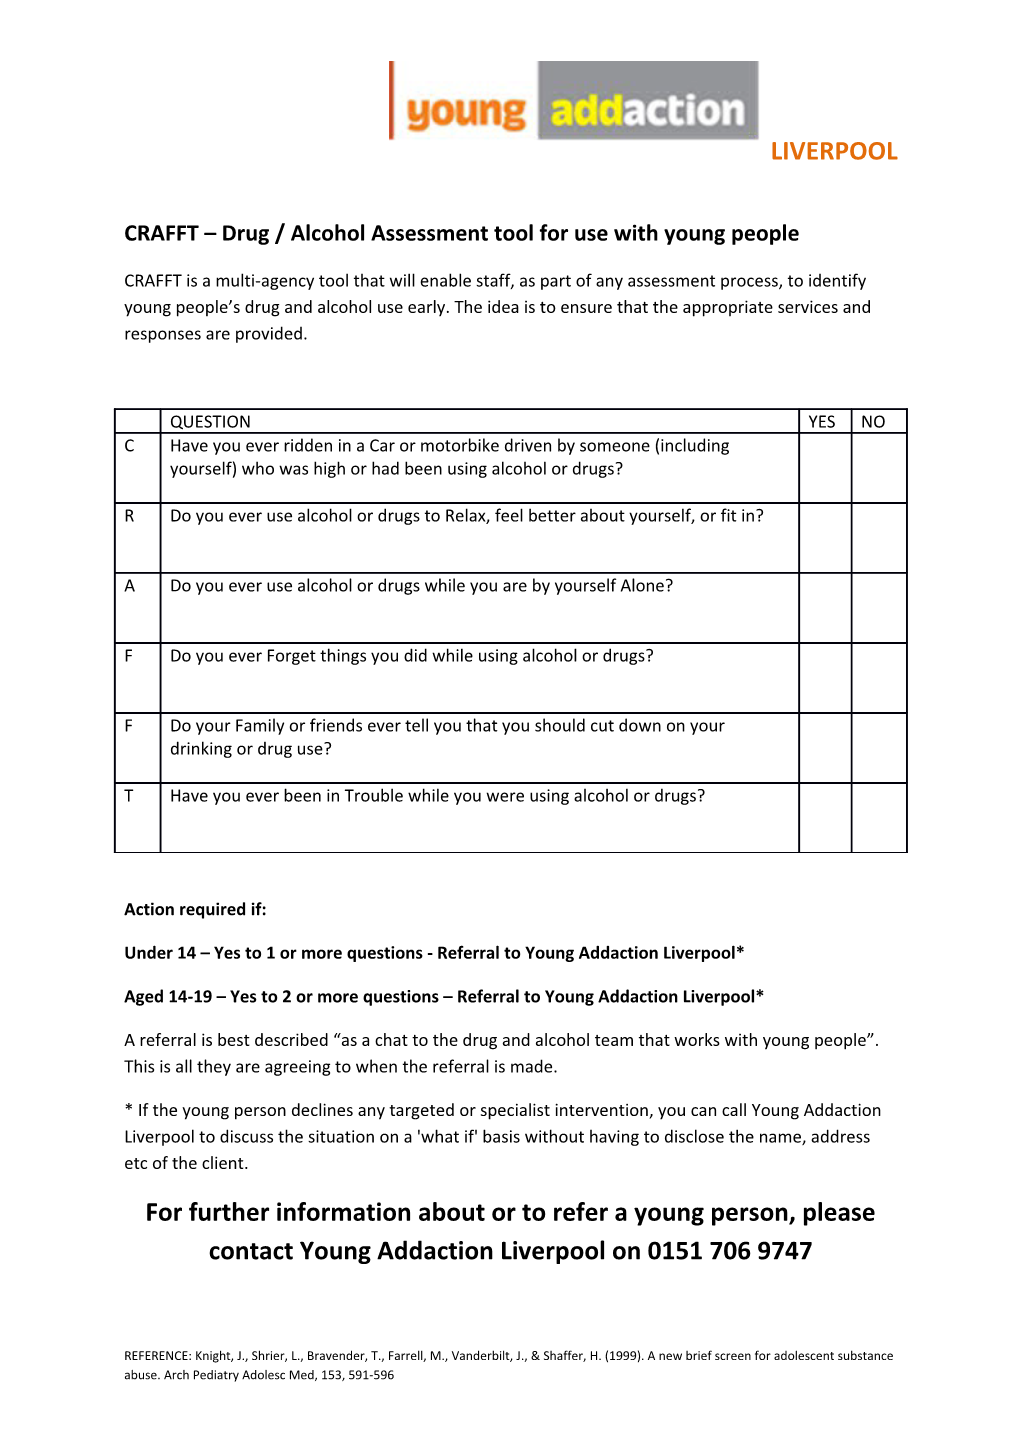 CRAFFT Drug / Alcohol Assessment Tool for Use with Young People